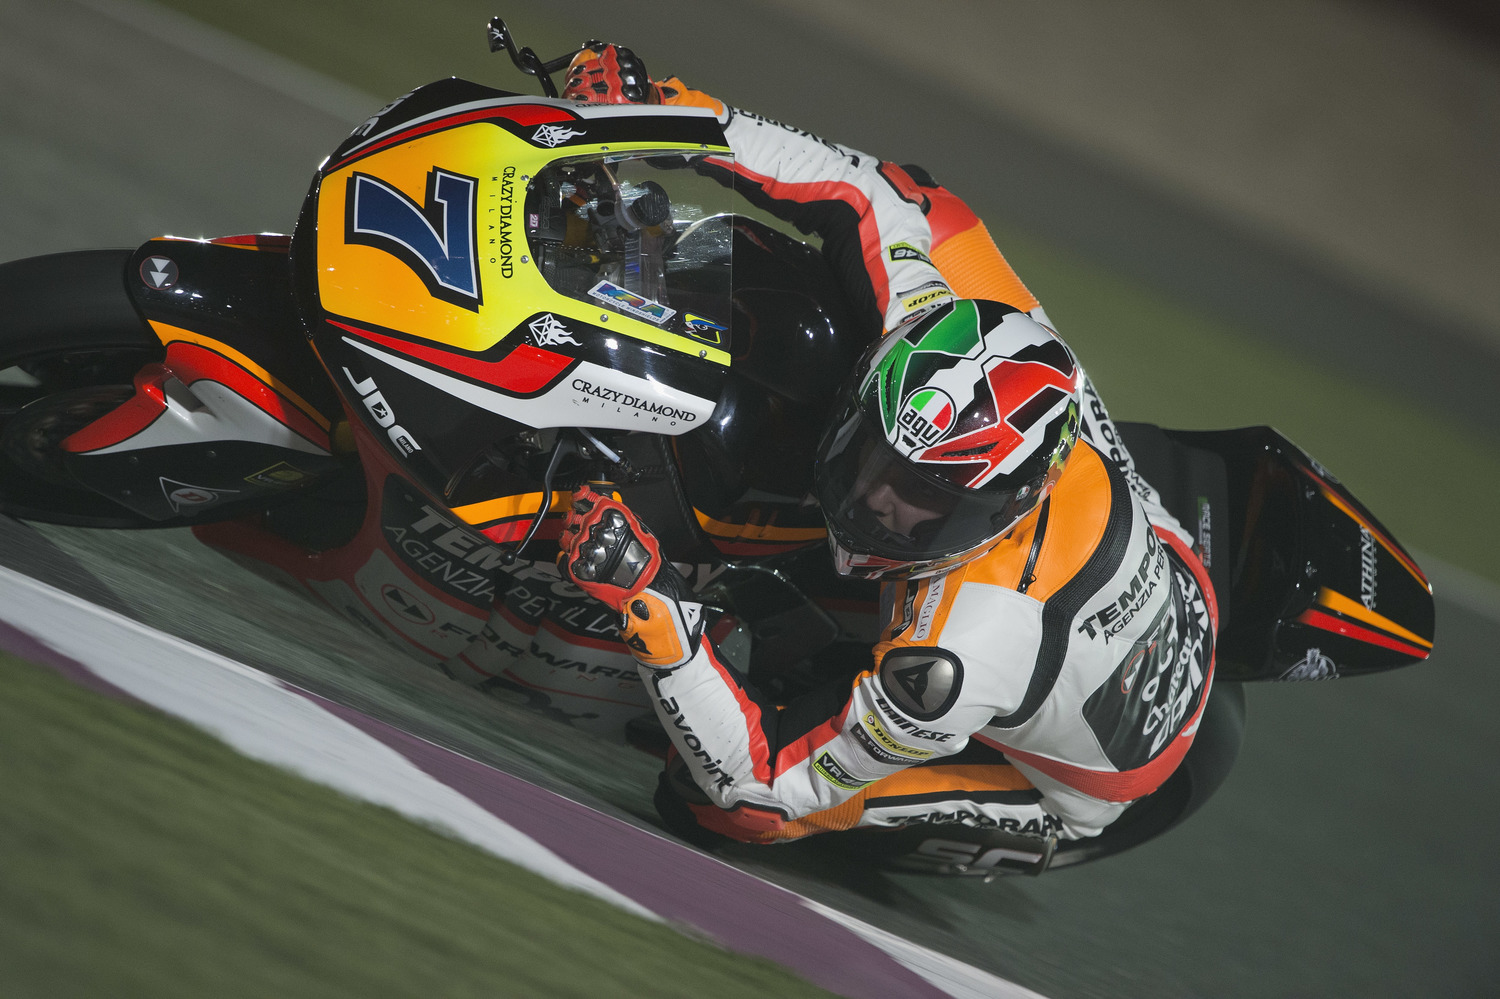 Things are getting serious in Qatar, positive day one for the Forward Racing Team.